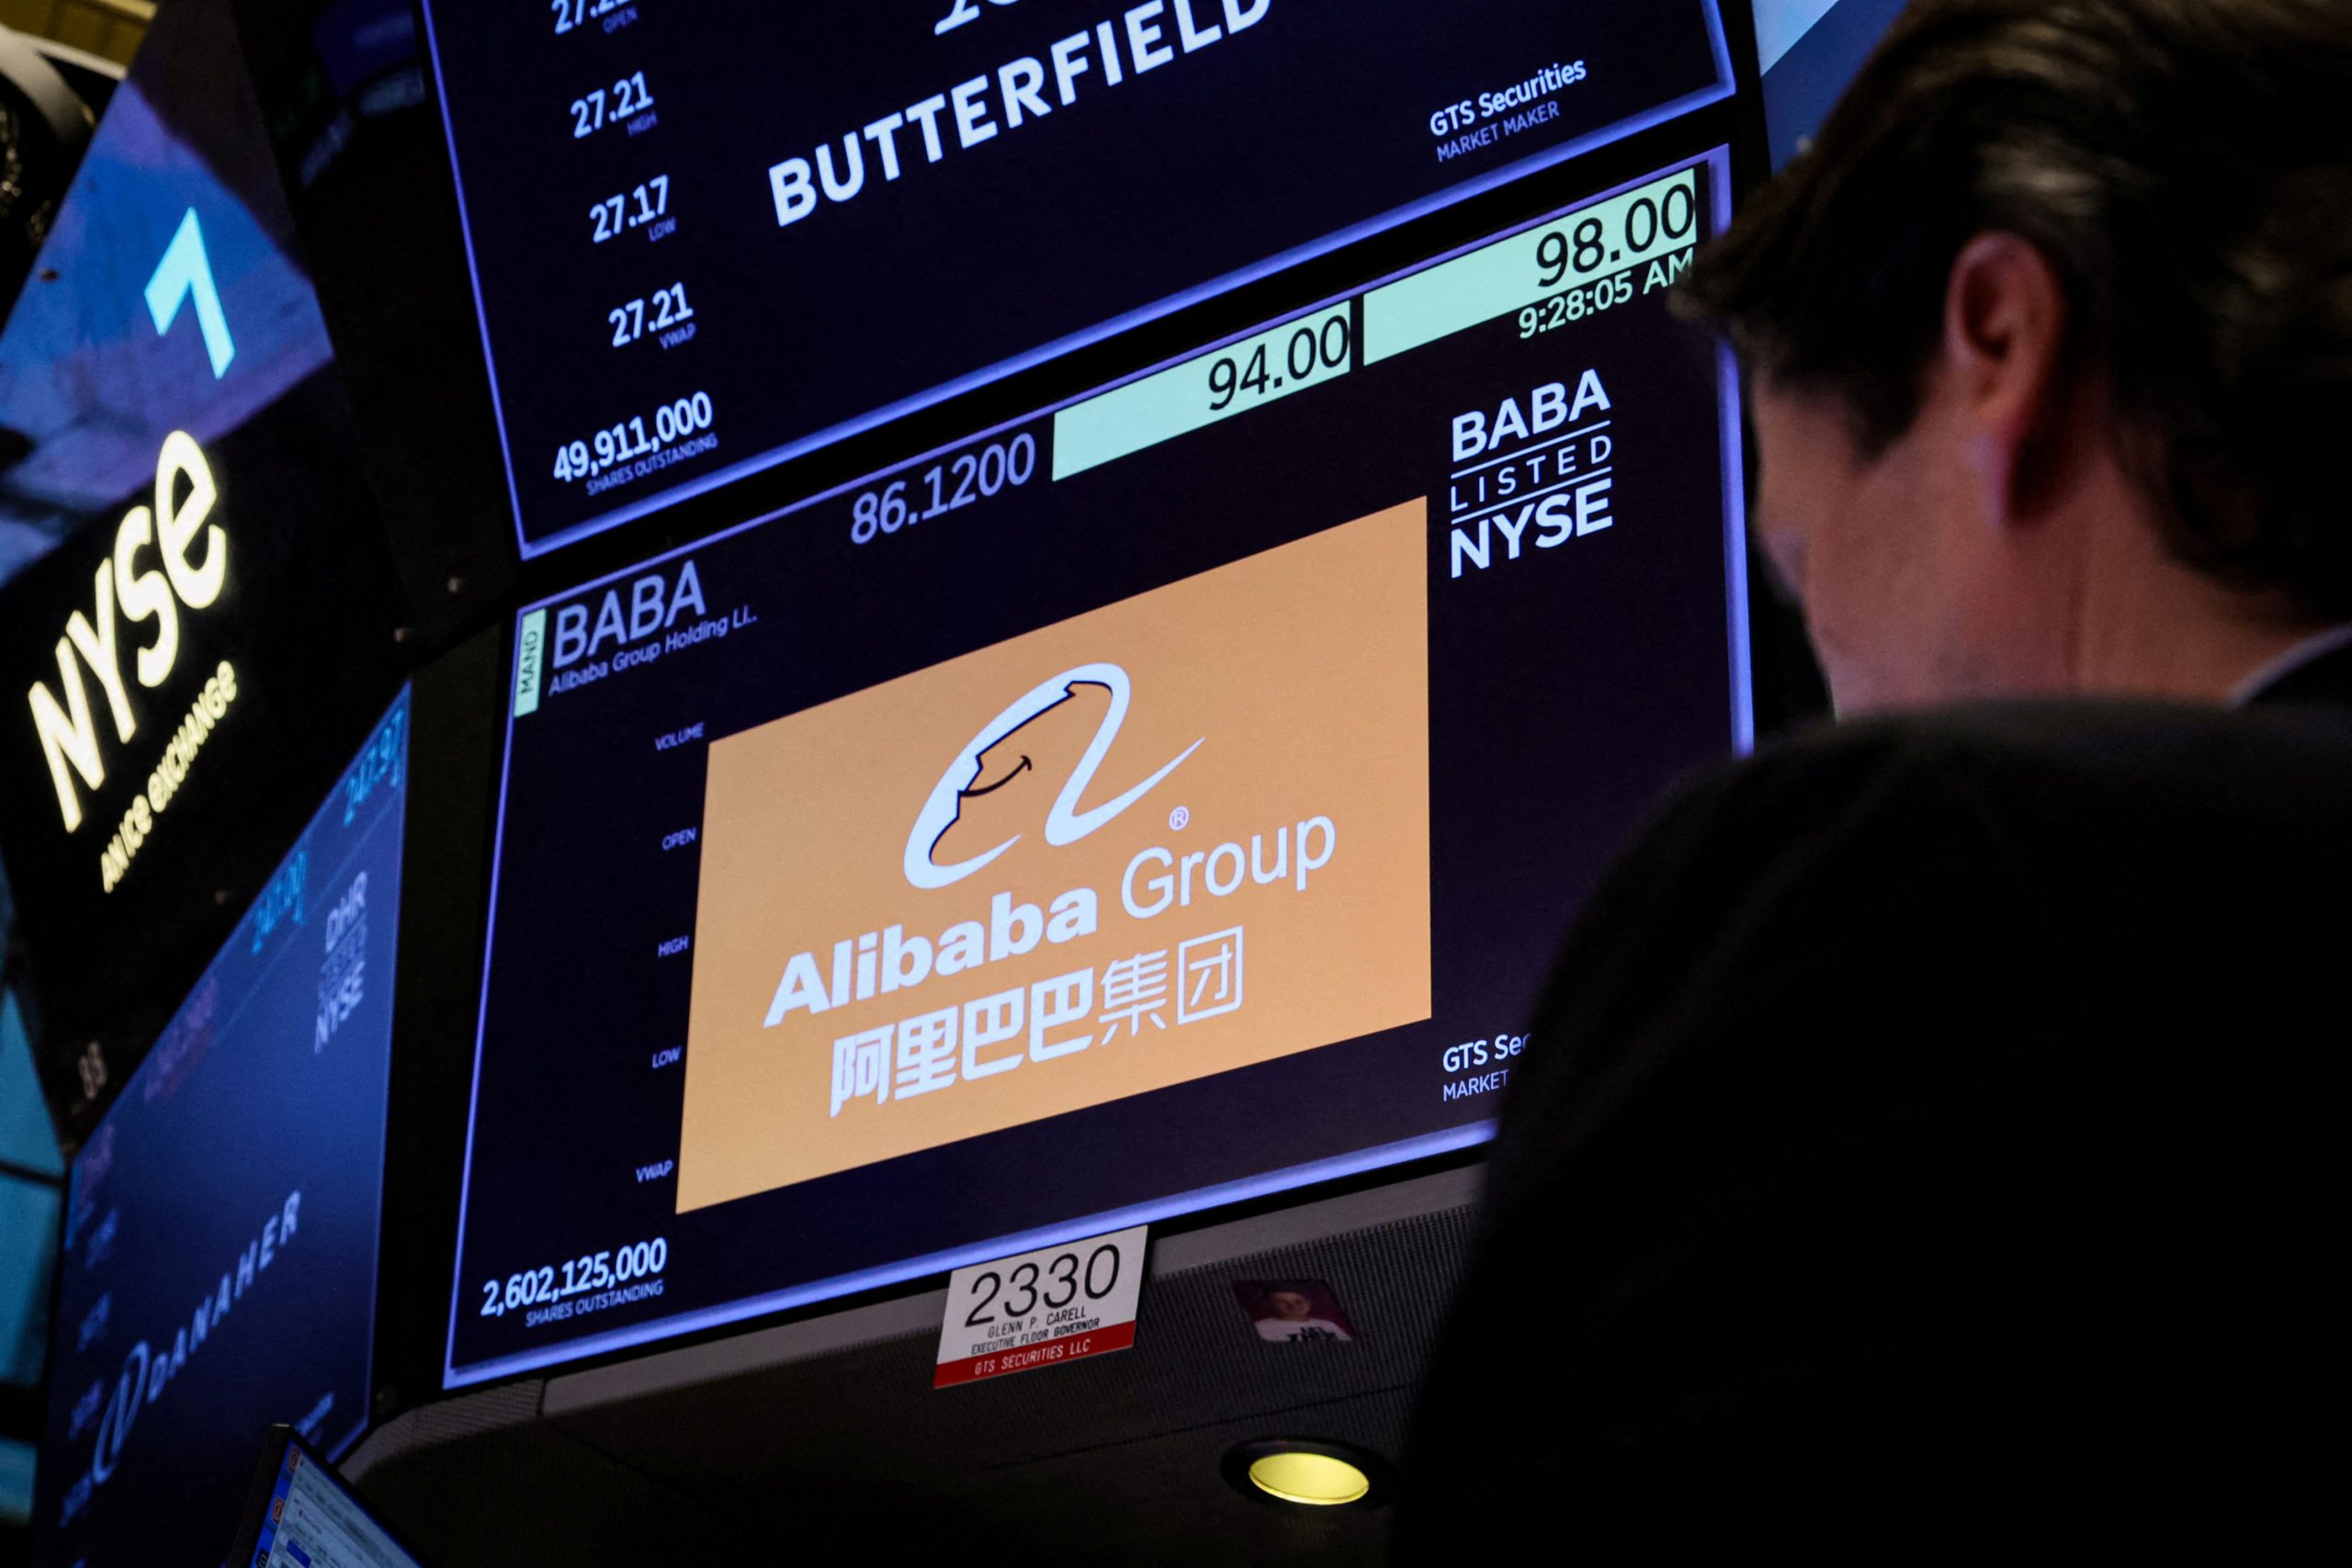 Fitch says Alibaba’s new structure will not impact credit profile